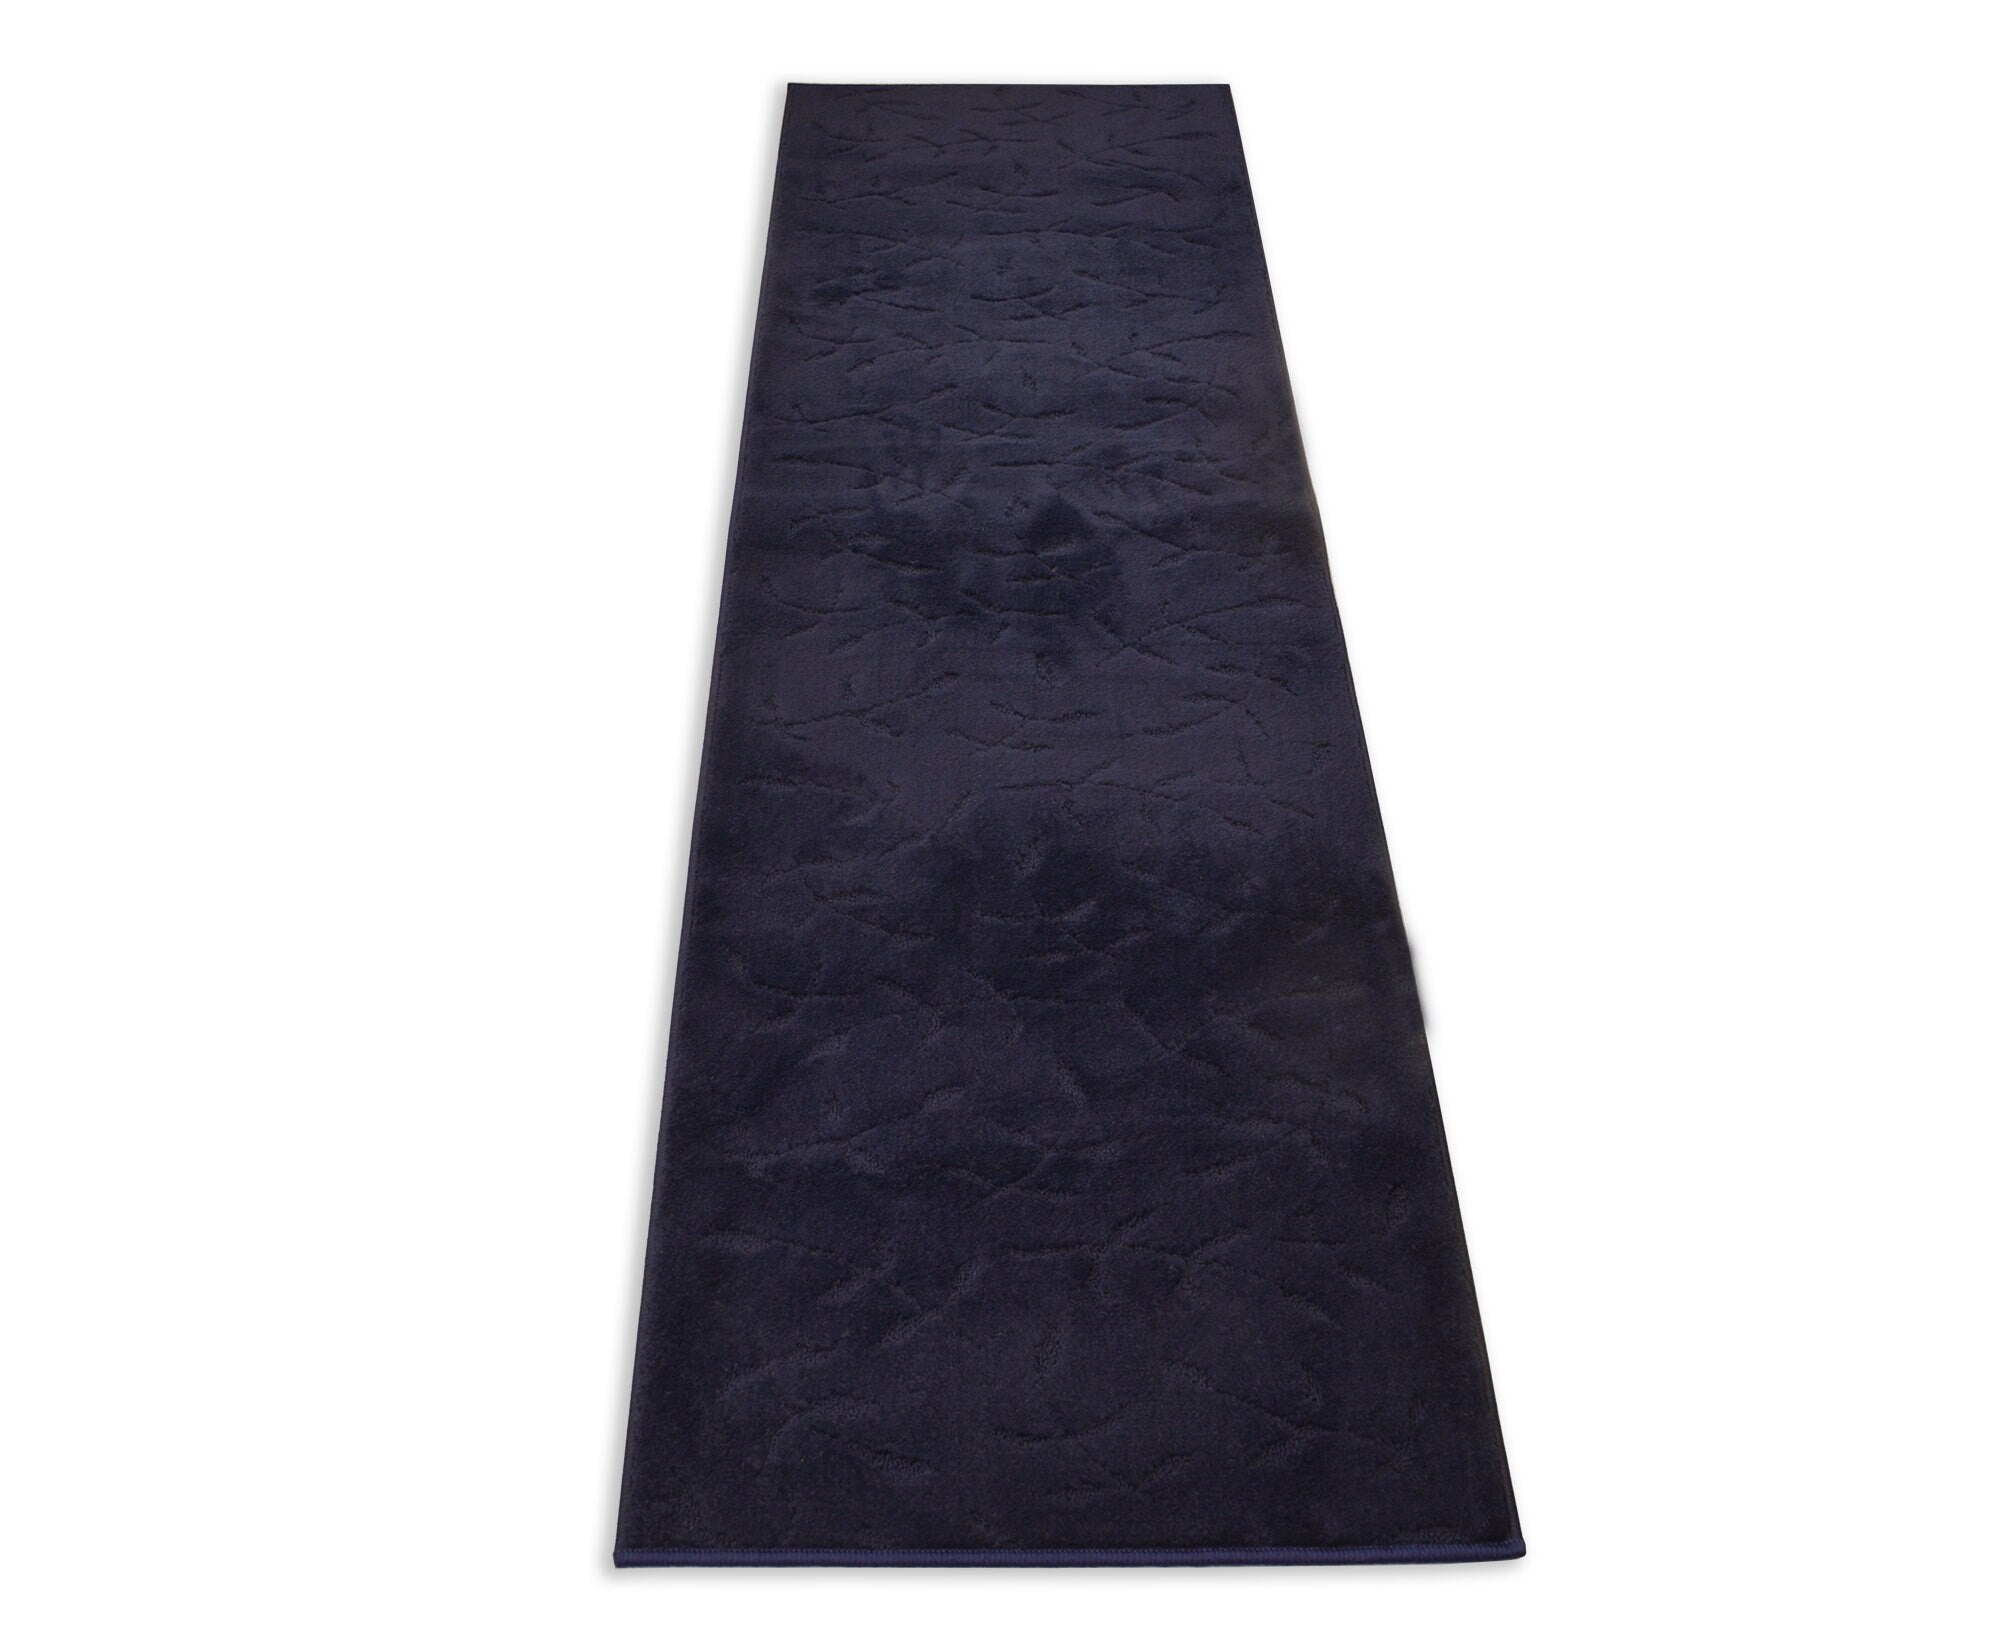 Custom Size Runner Rug Solid Floral Scroll Navy Blue Skid Resistant Rug Runner Customize Up to 50 Feet and 25 Inches Width Cut to Size Rugs - 0